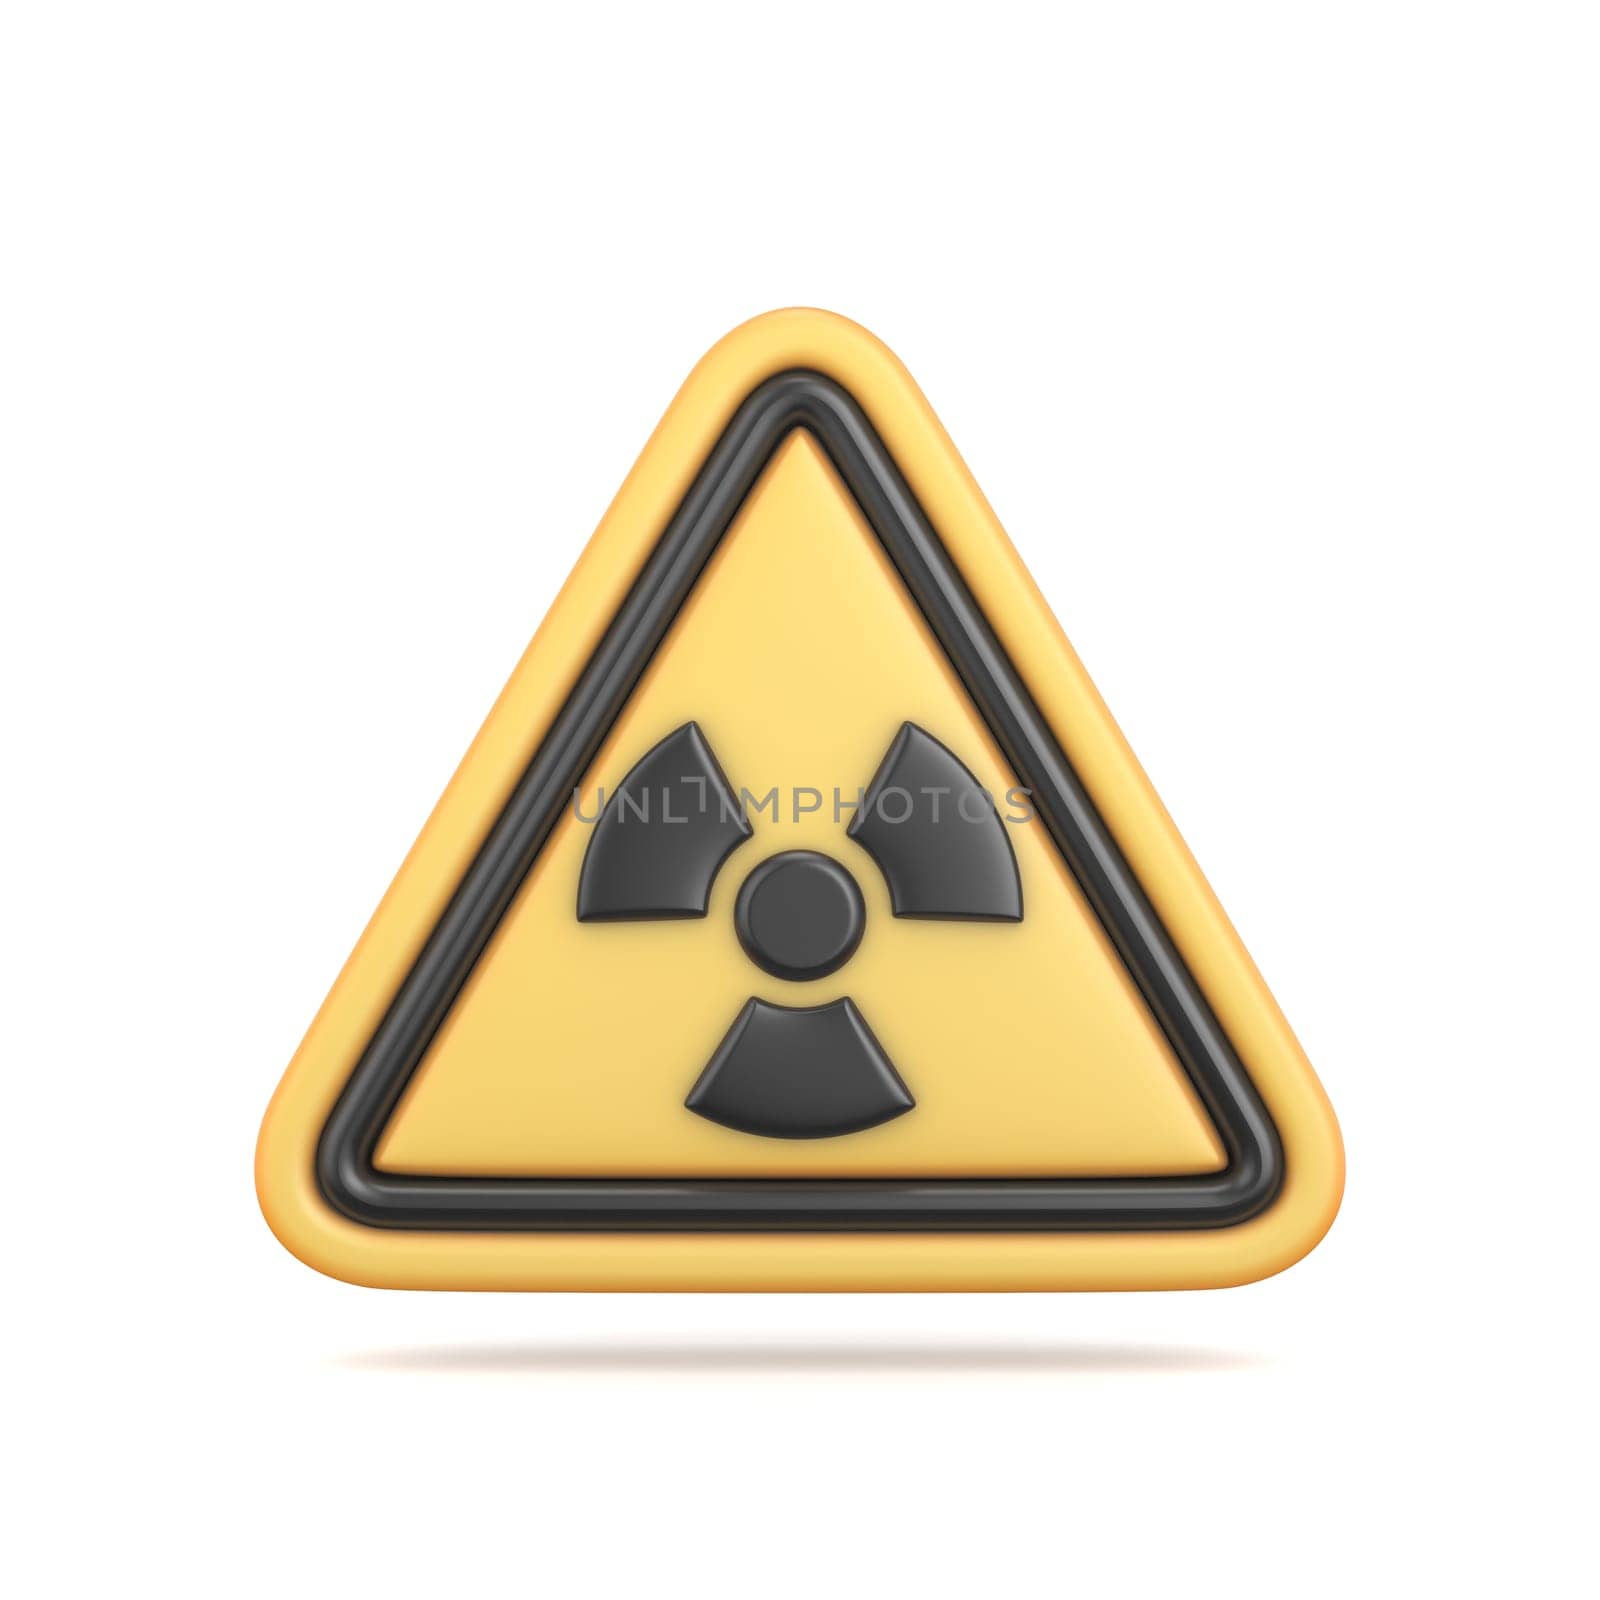 Traffic sign Radioactive sign 3D rendering illustration isolated on white background